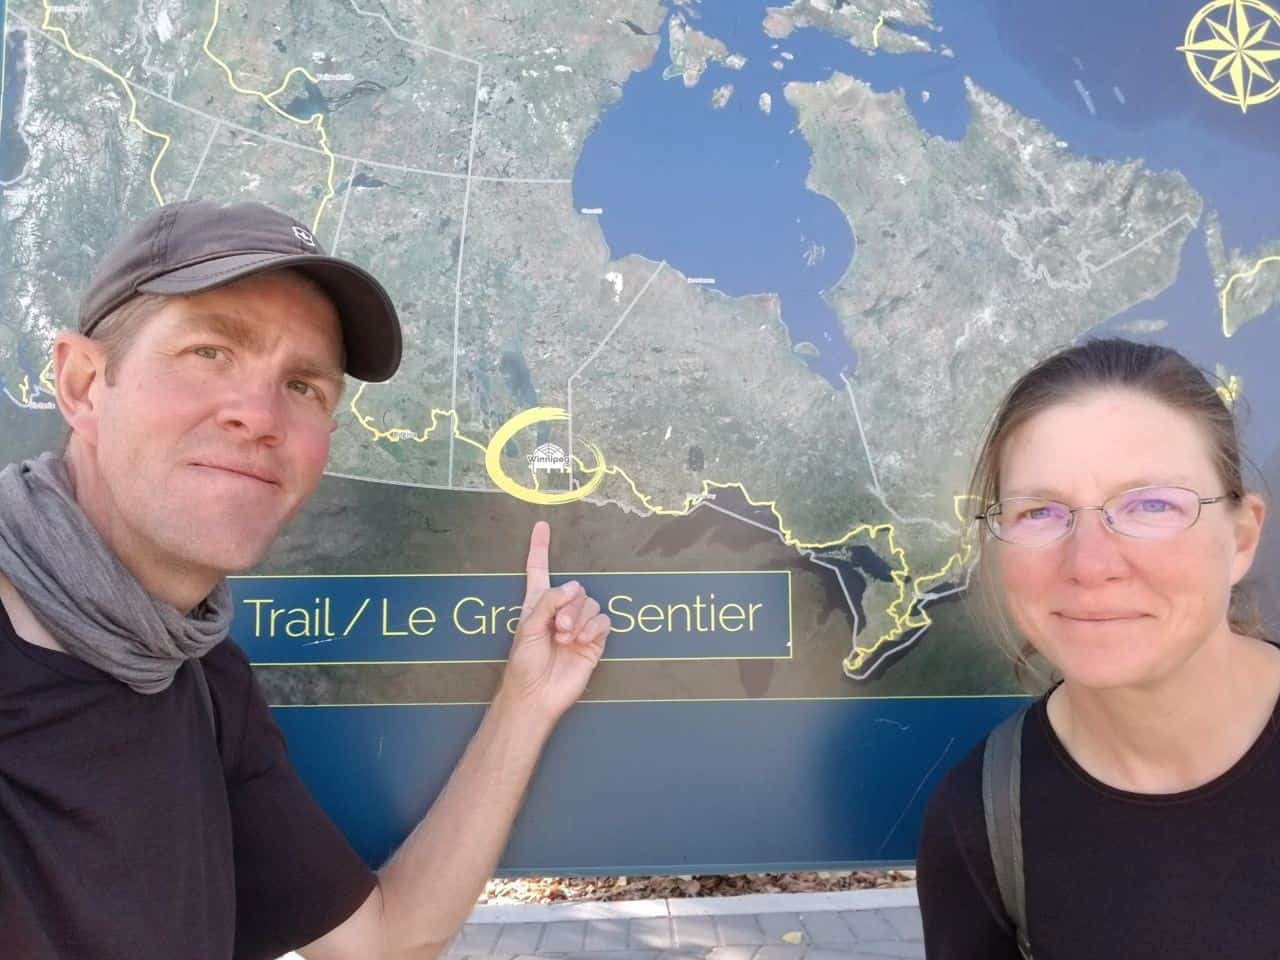 Winnipeg, Manitoba is about half-way between the Atlantic and Pacific Oceans for cross-Canada hikers on the Trans Canada Trail like Sonya Richmond and Sean Morton.